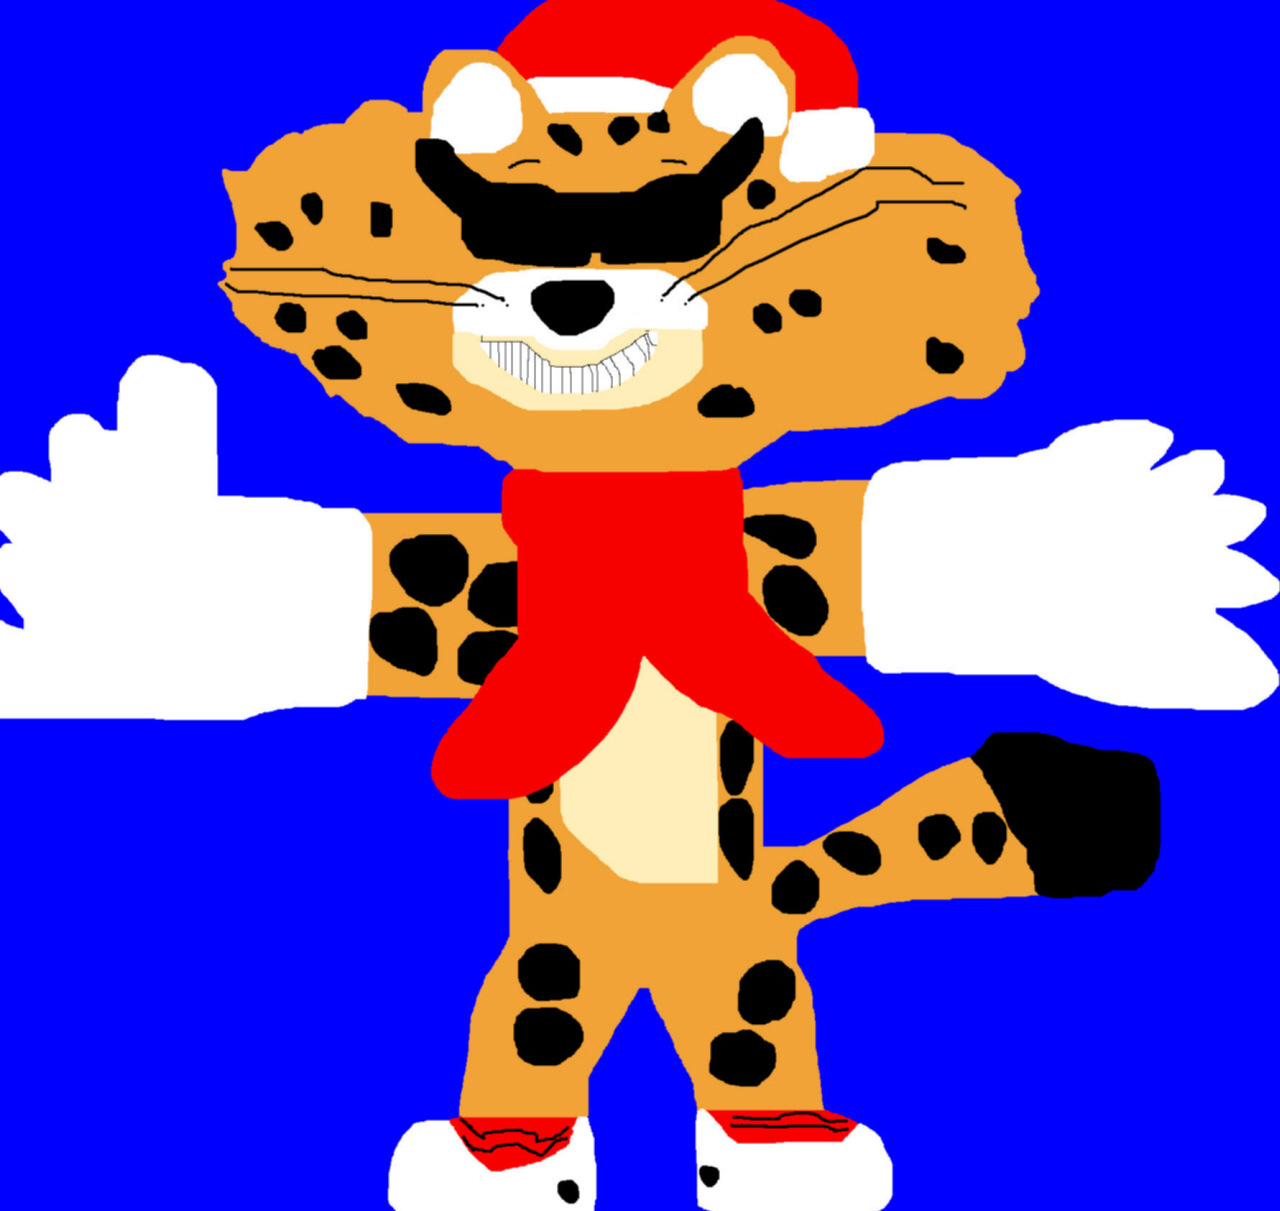 Chester Cheetah In A Santa Hat And Scarf Ms Paint by Falconlobo